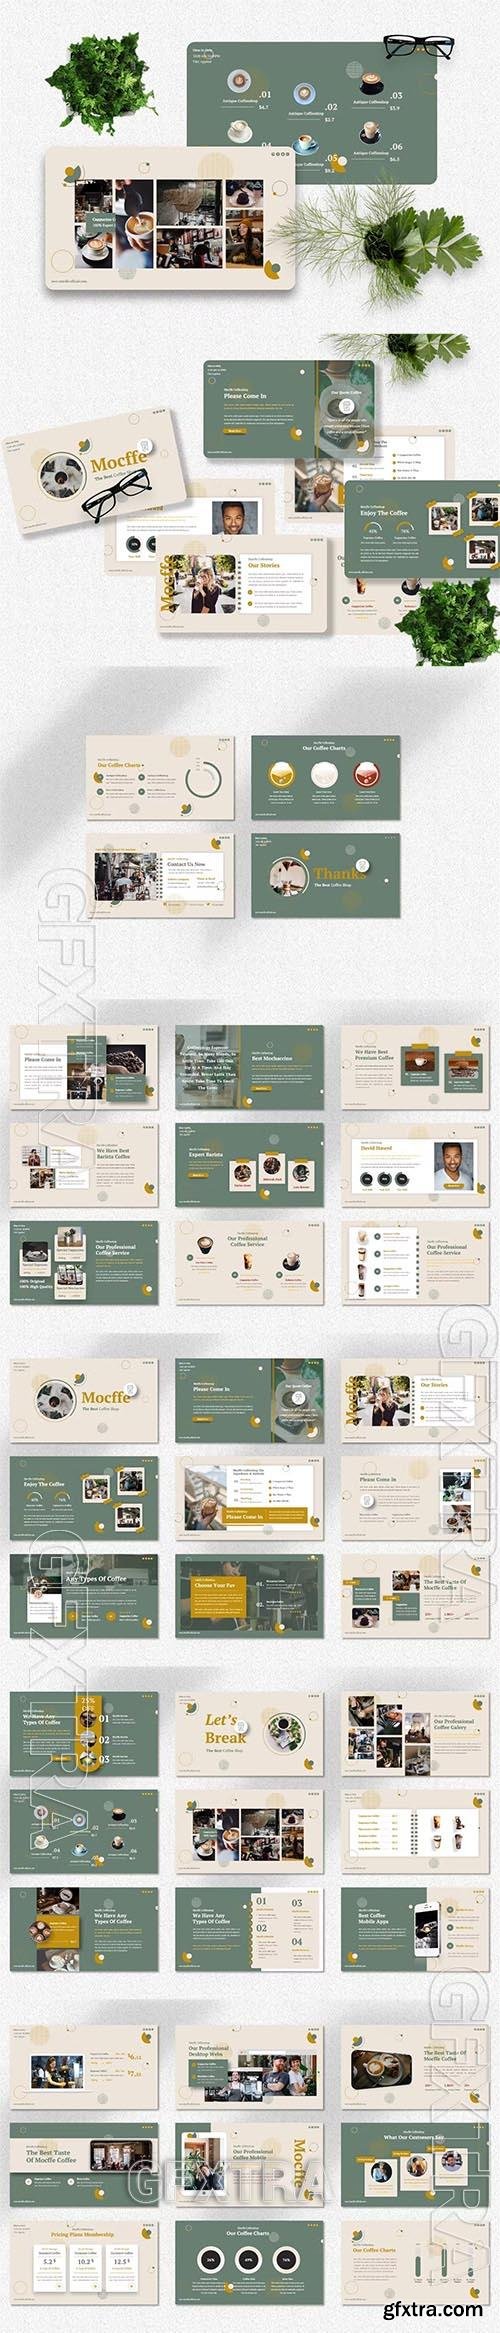 Mocffe - Coffee Shop Powerpoint, Keynote and Google Slides Templates 